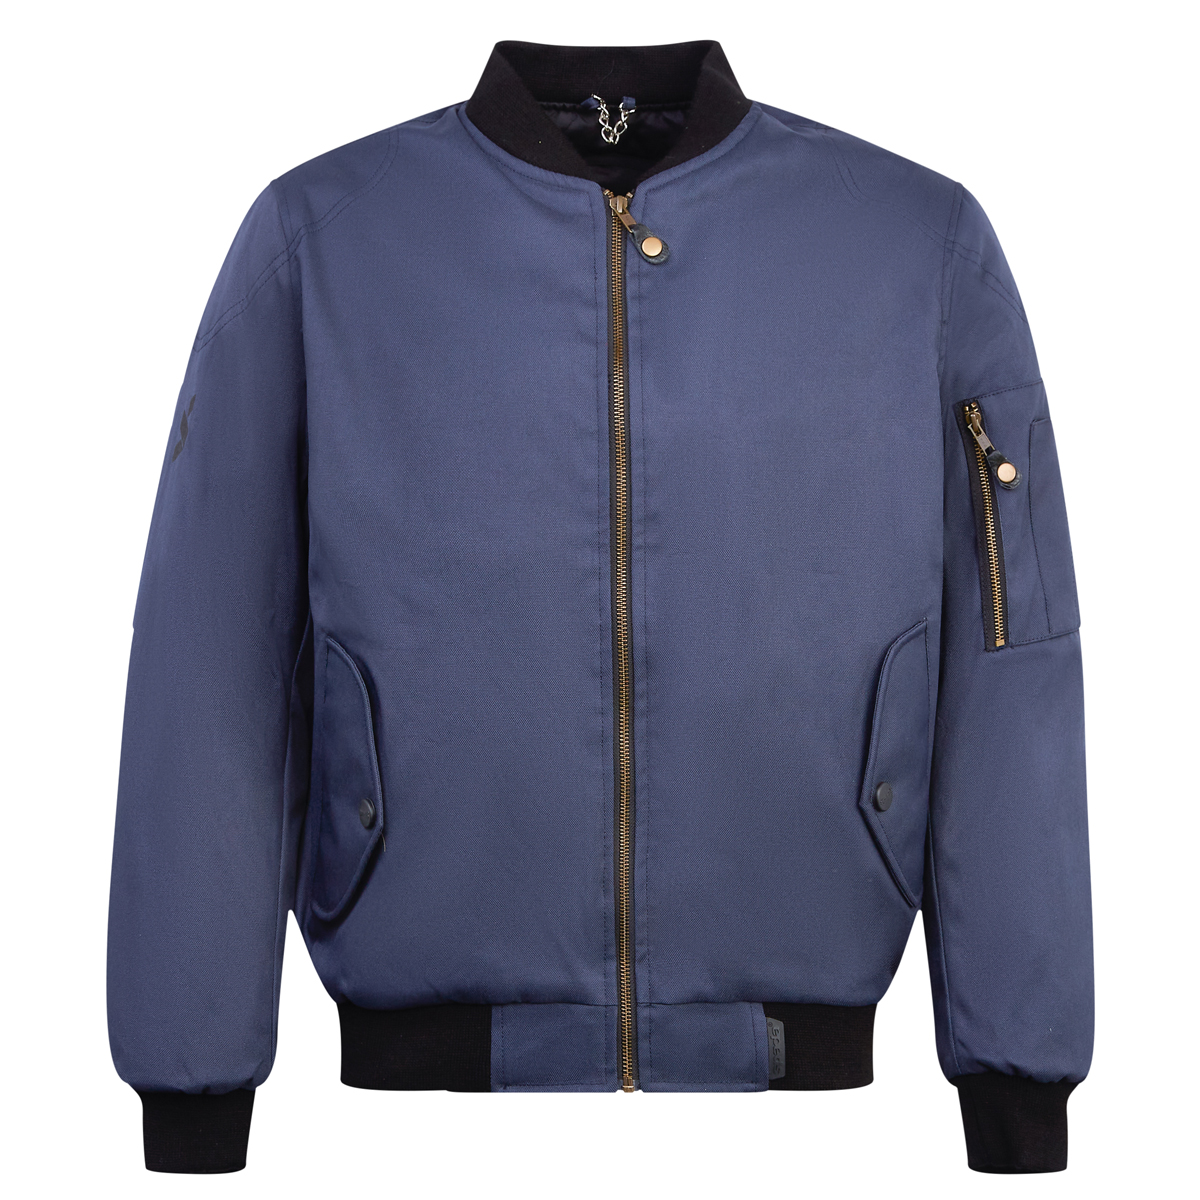 Spada Air Force 1 CE Jacket, Navy Blue – Chas Mann Motorcycles